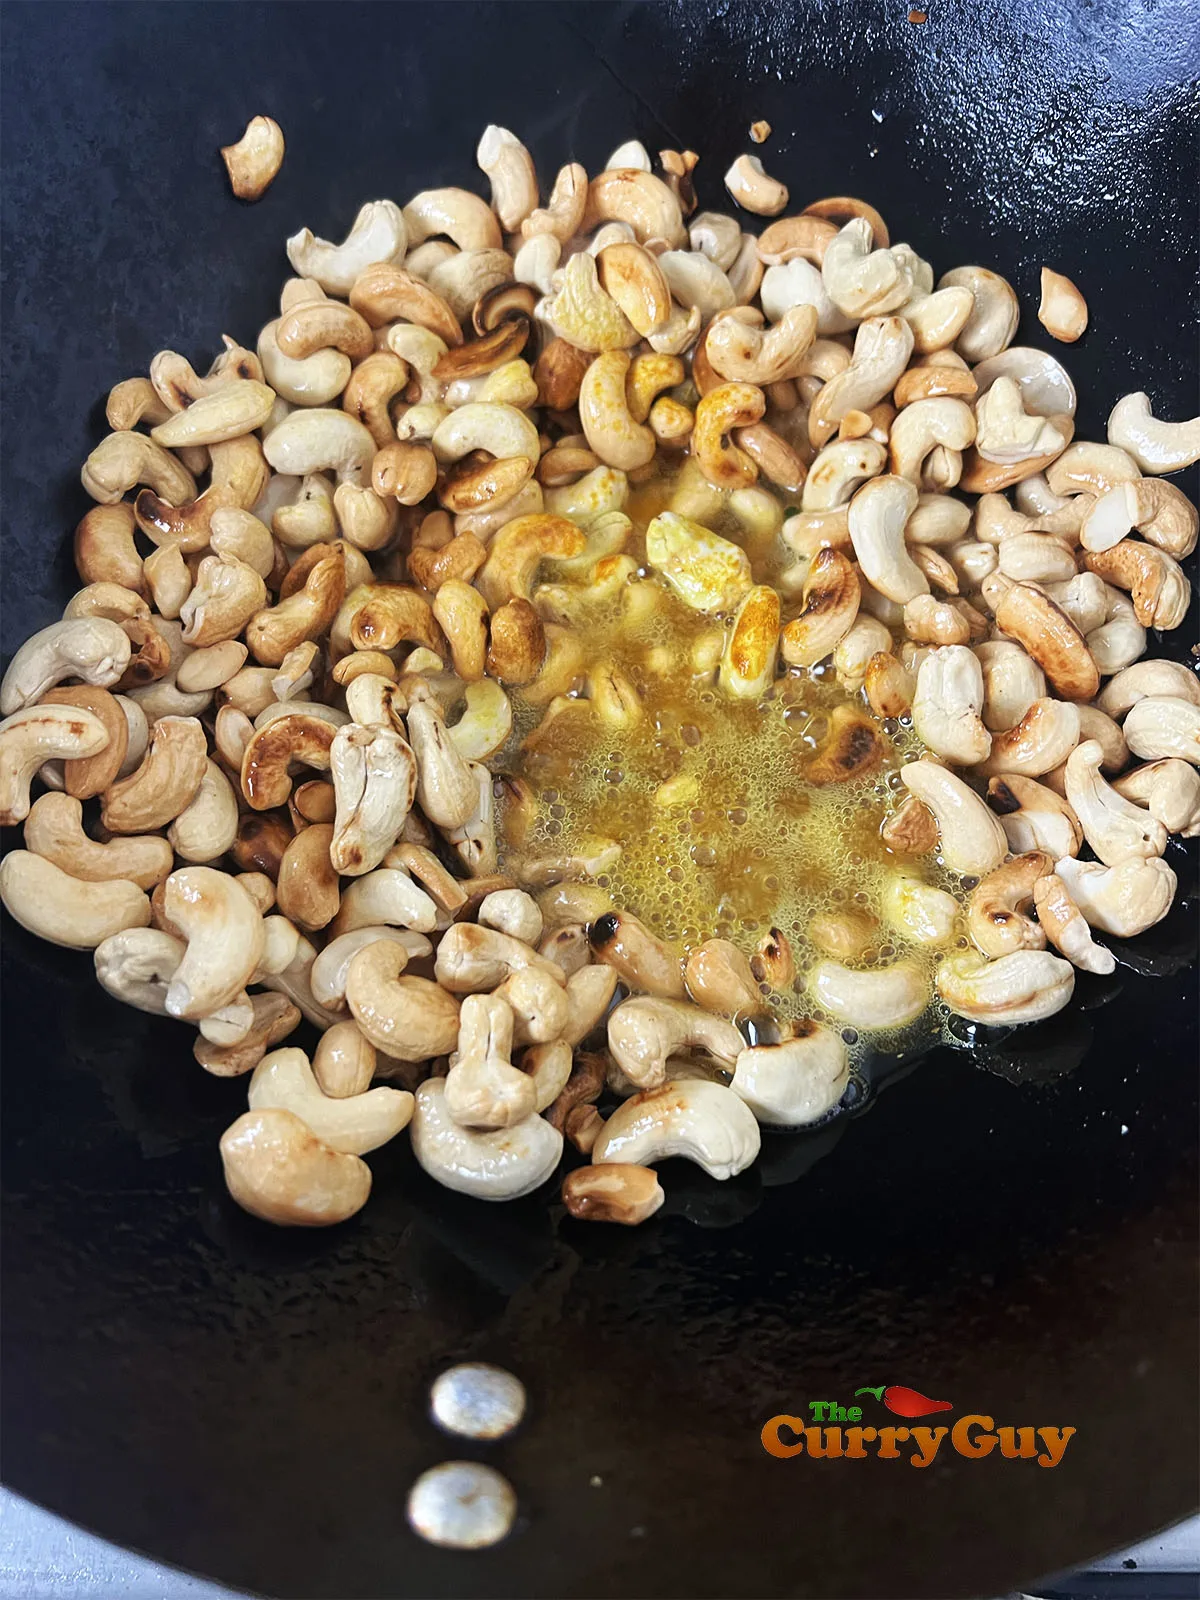 Frying the cashews and adding turmeric